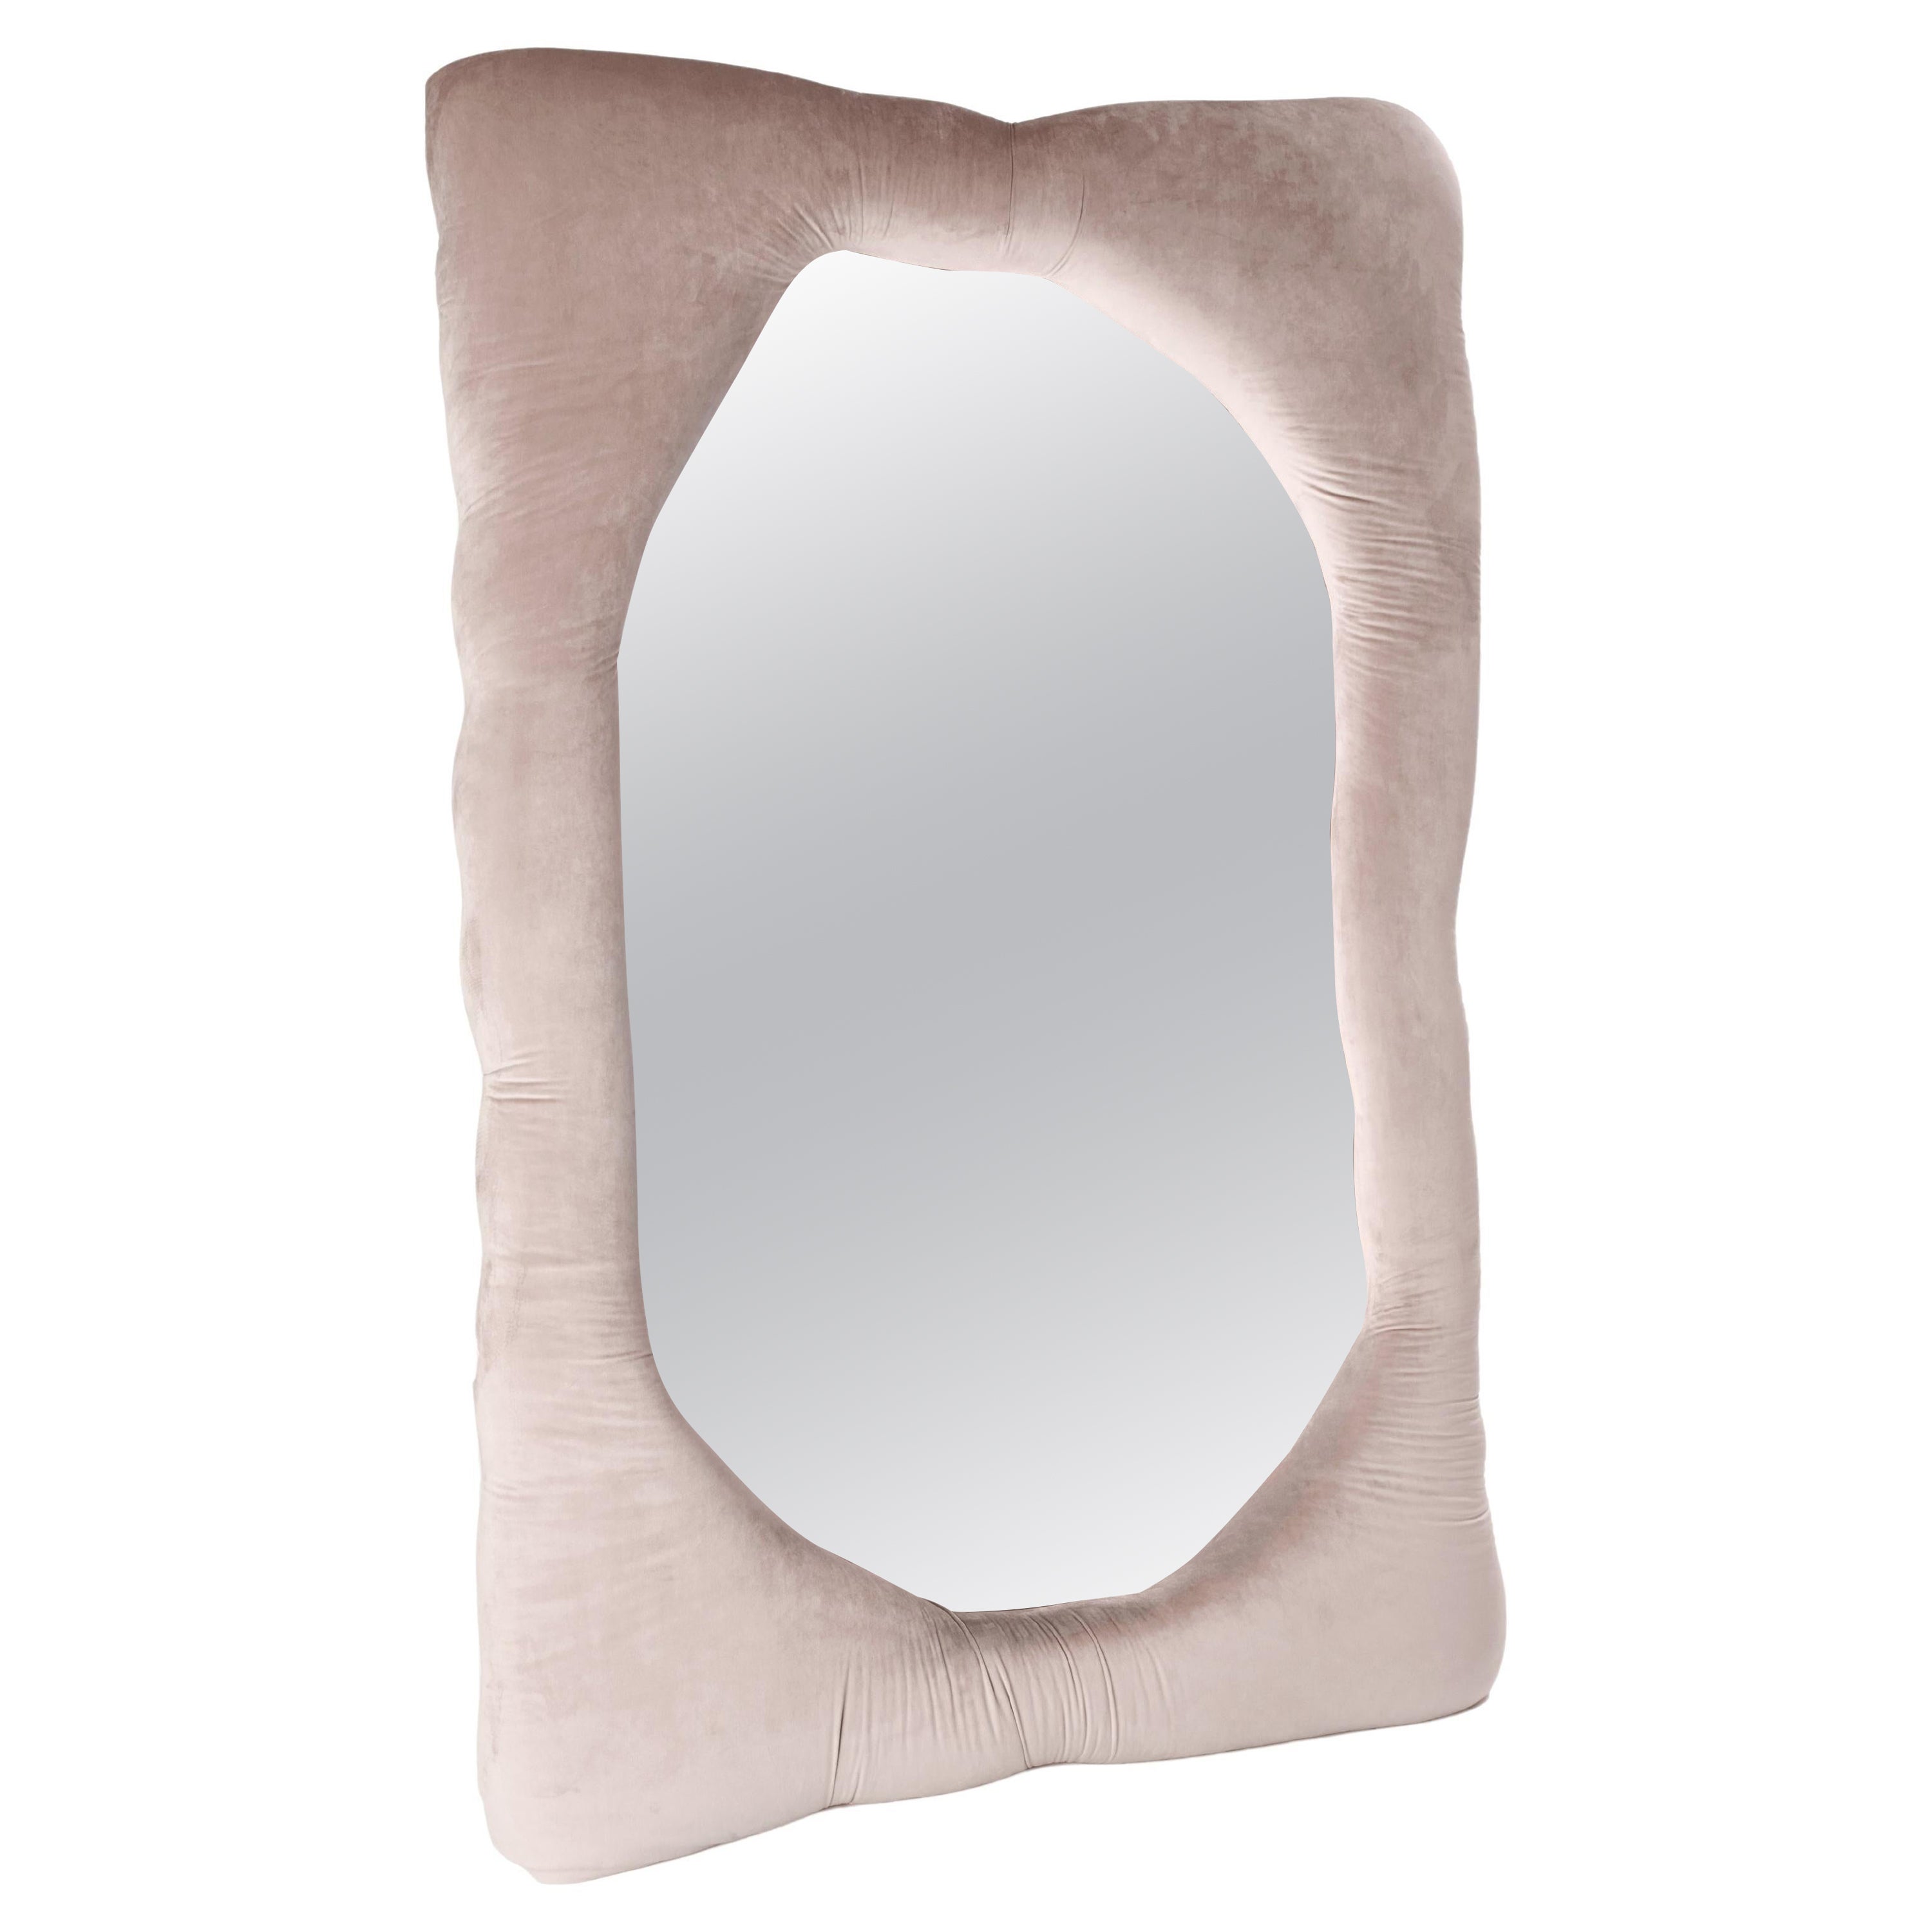 Velvet Biomorphic Mirror in Coral Pink by Brandi Howe, REP by Tuleste Factory For Sale